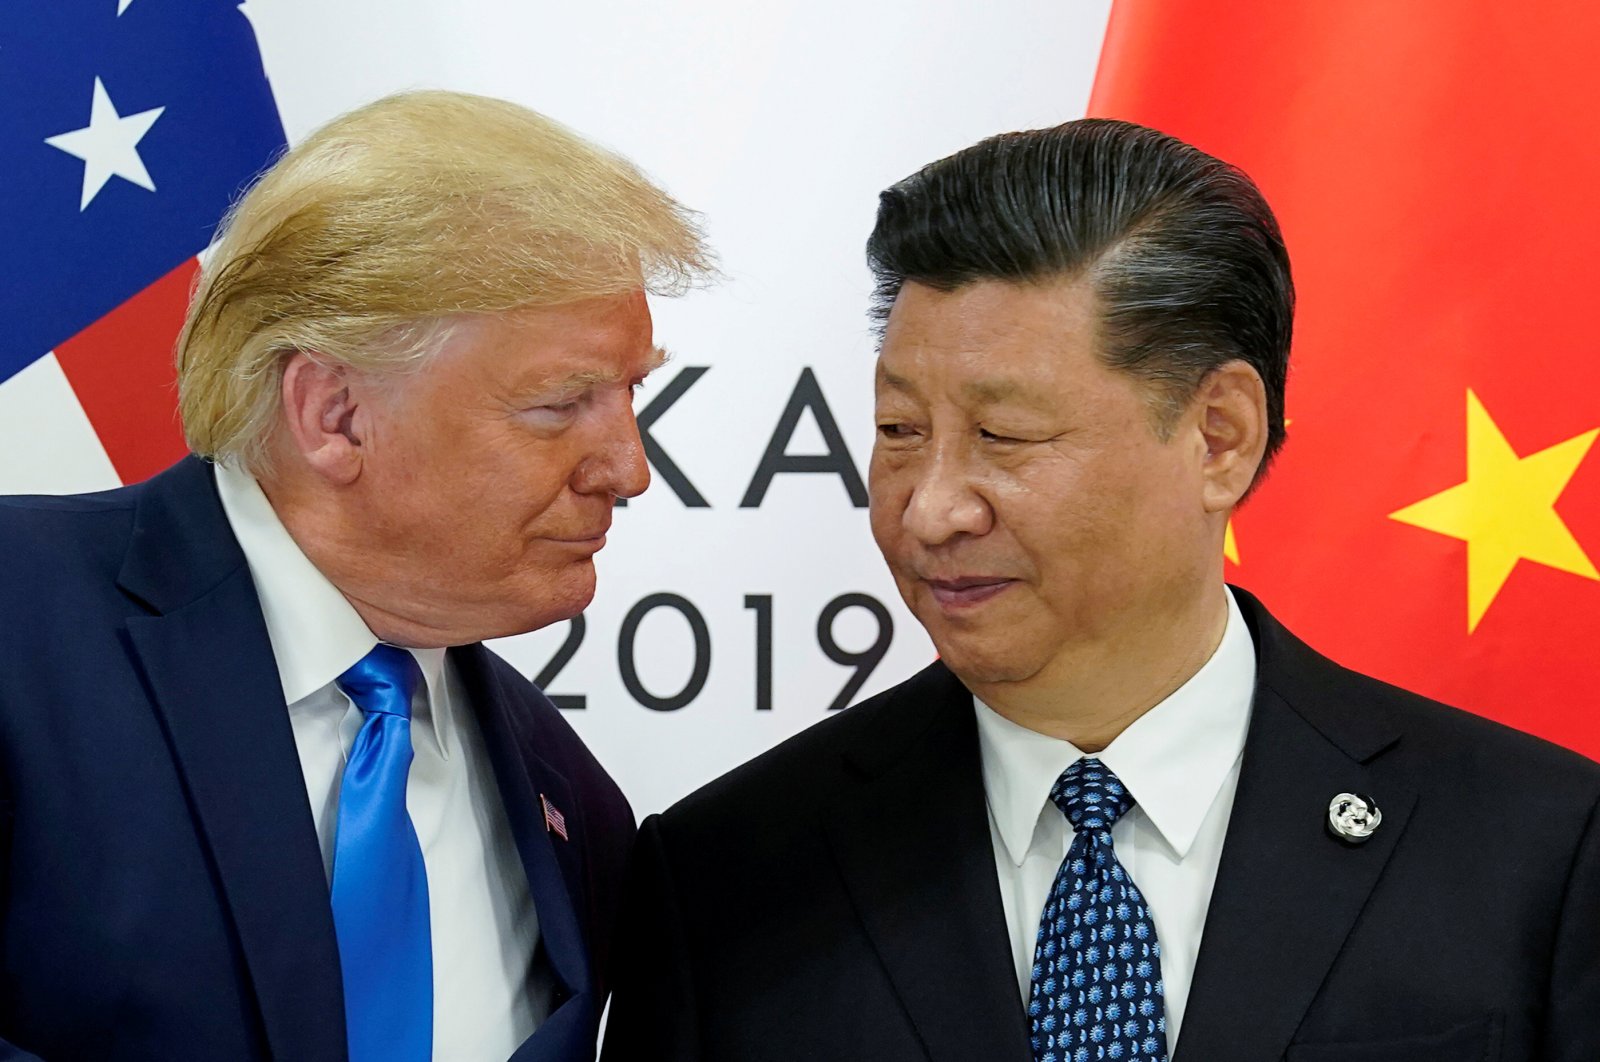 U.S. President Donald Trump meets with China's President Xi Jinping at the start of their bilateral meeting at the G-20 leaders' summit in Osaka, Japan, June 29, 2019. (Reuters File Photo)